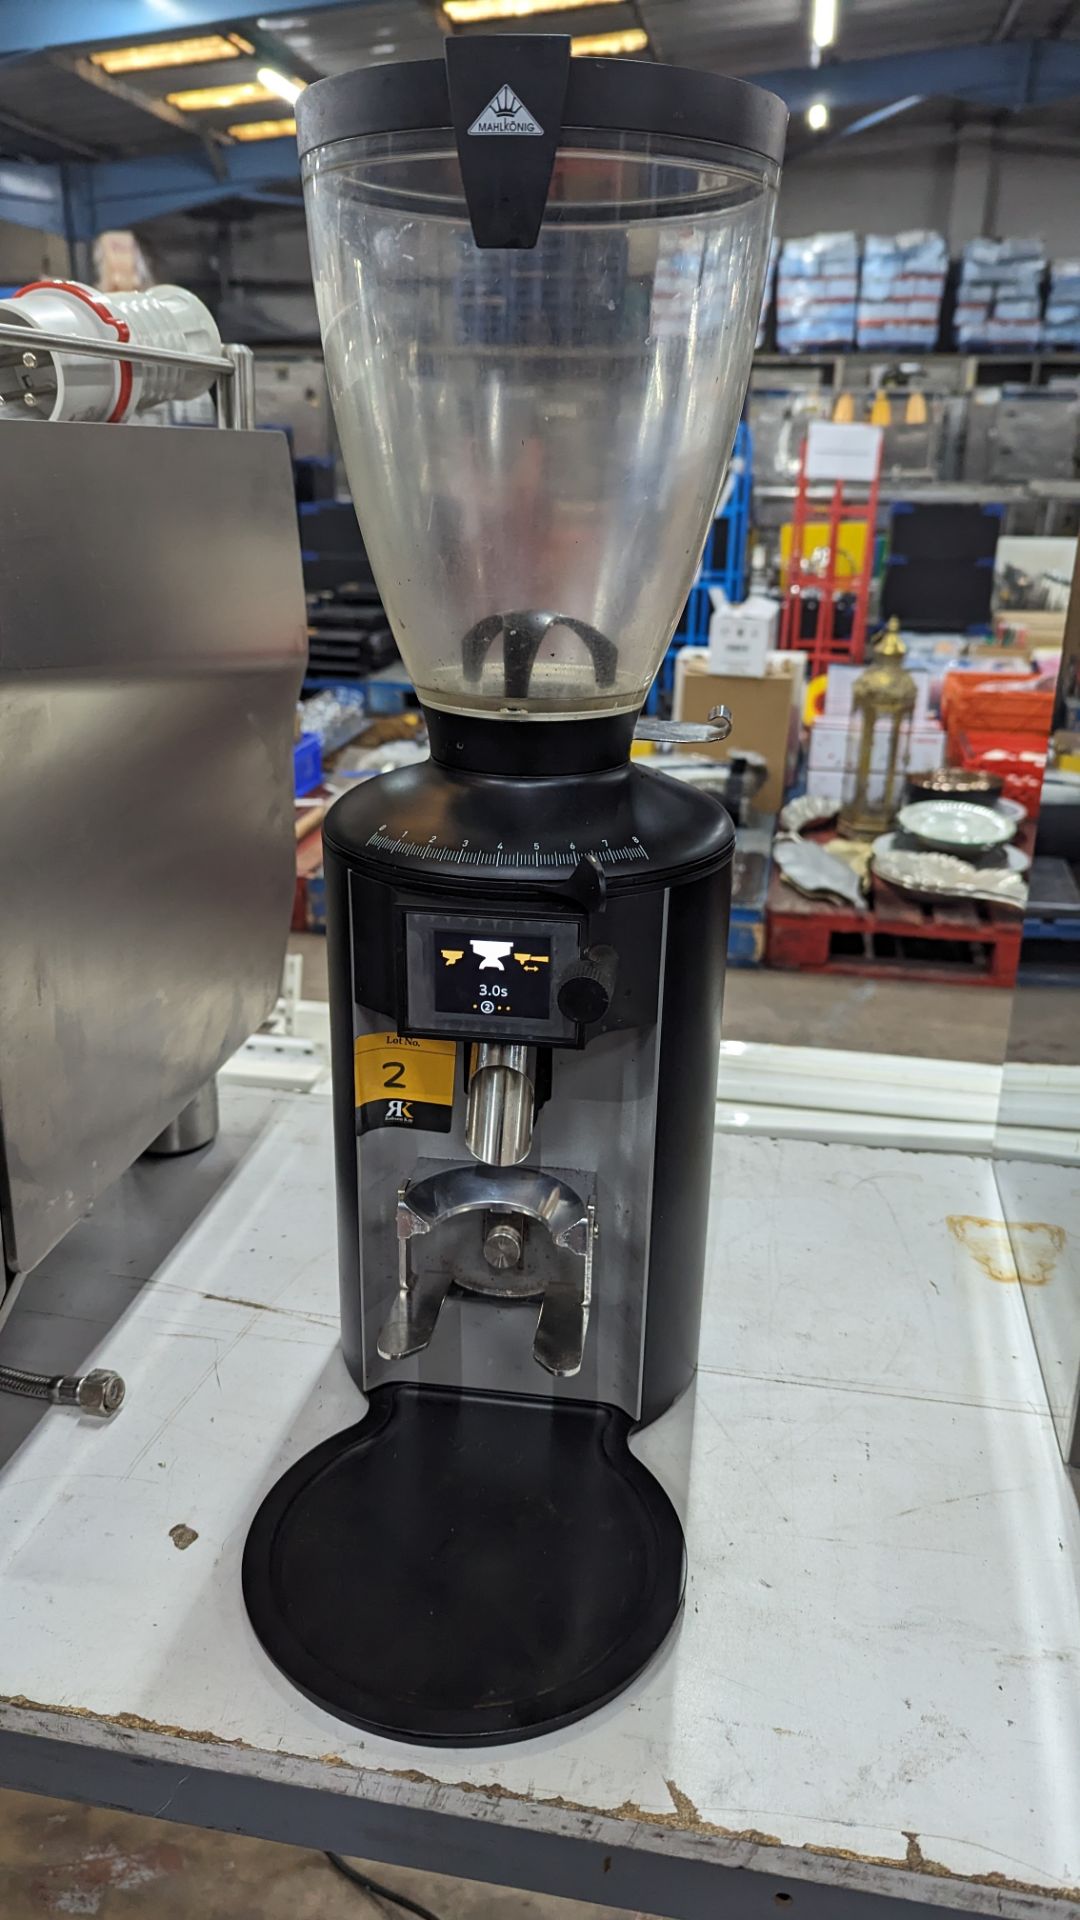 Anfim Pratica commercial coffee grinder with digital display, model AE652.4B - Image 6 of 17